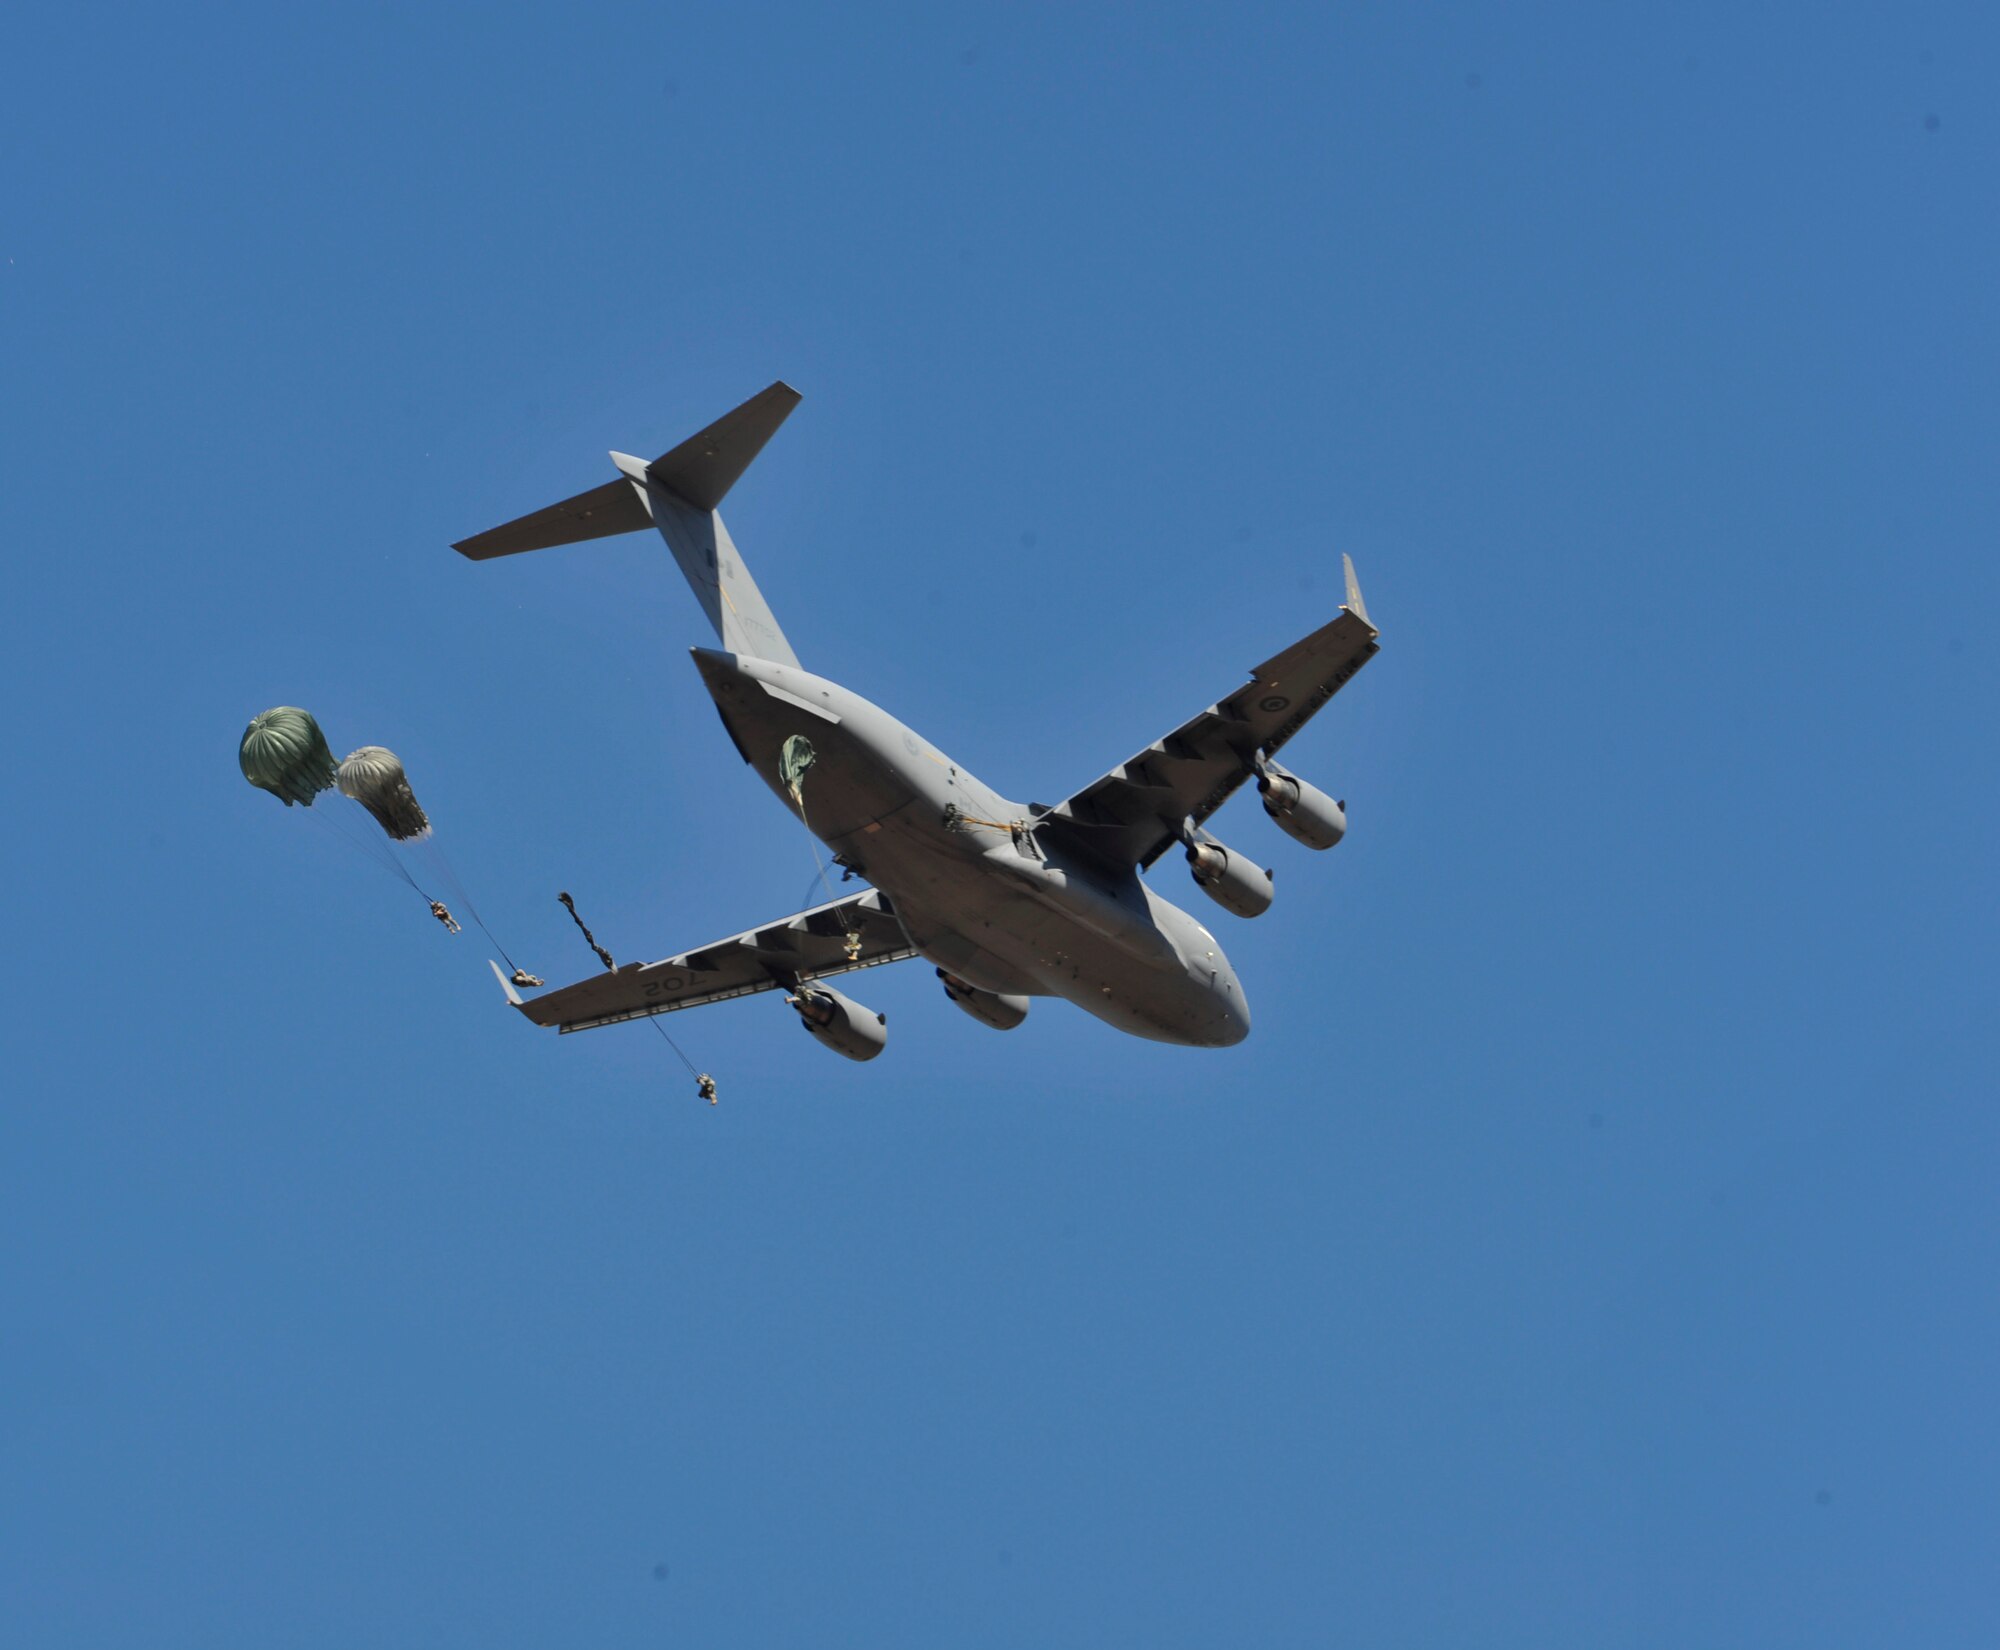 A U.S. Air Force C-130J Hercules aircraft drops Soldiers during Joint Operational Access Exercise (JOAX) 13-02 over Camp Mackall, N.C., Feb. 24, 2013. A JOAX is designed to enhance service cohesiveness between Army and Air Force personnel, allowing both services an opportunity to properly execute large-scale heavy equipment and troop movement. (U.S. Air Force photo by Airman 1st Class Jasmonet Jackson/Released)
